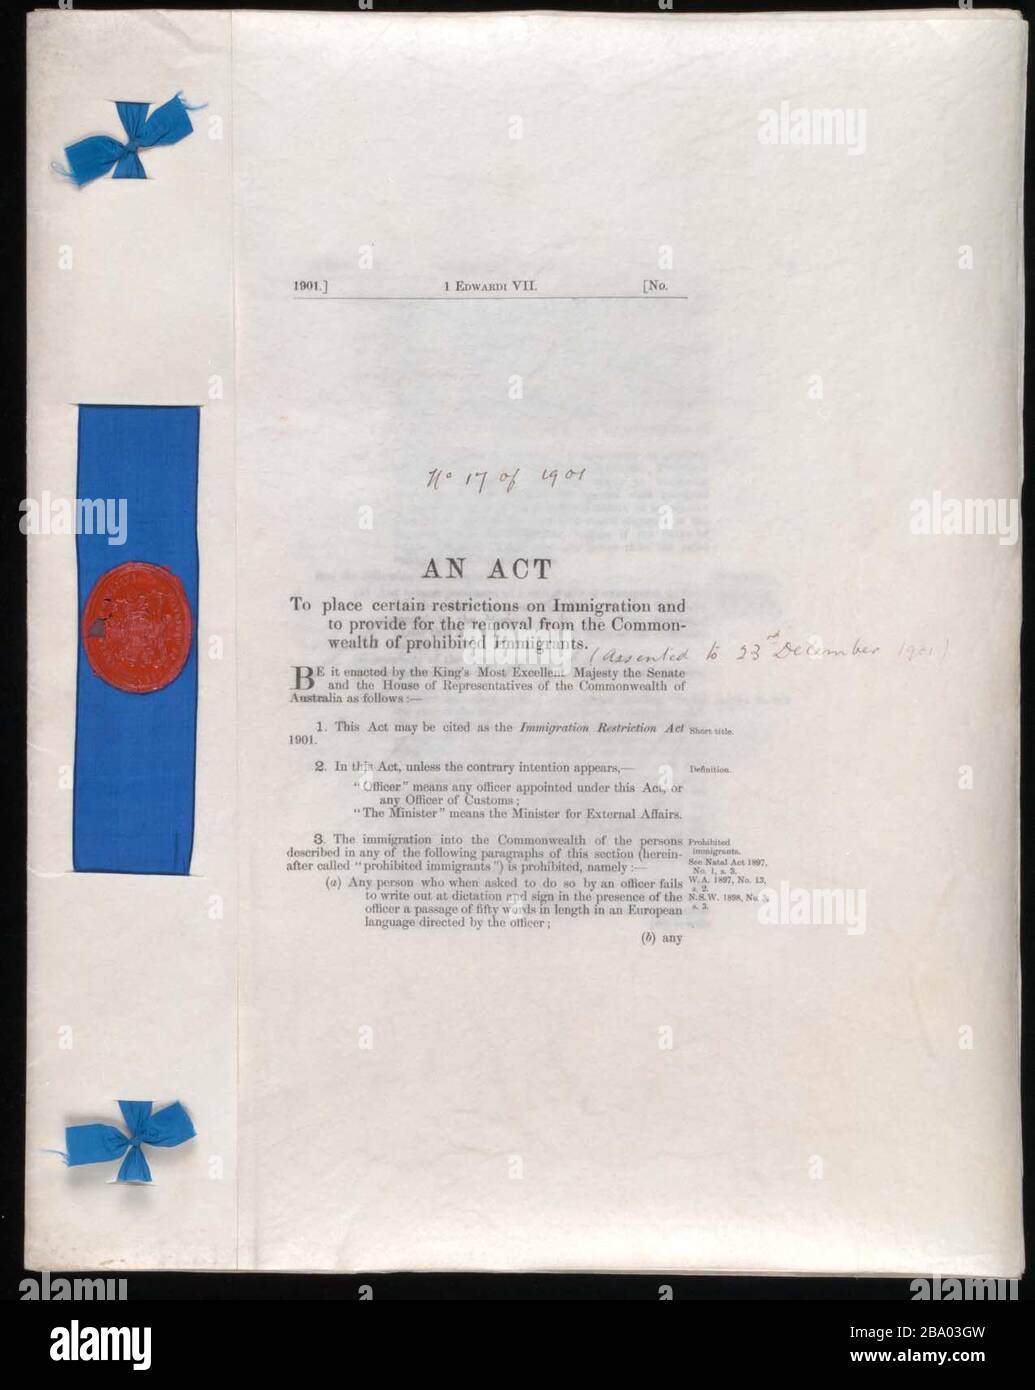 'English: An Act to place certain restrictions on Immigration and to provide for the removal from the Commonwealth of prohibited Immigrants - [Immigration Restriction Act 1901] Series number = A1559 Barcode =11421113; 1901; National Archives of Australia - series number A1559; Parliament of Australia; ' Stock Photo